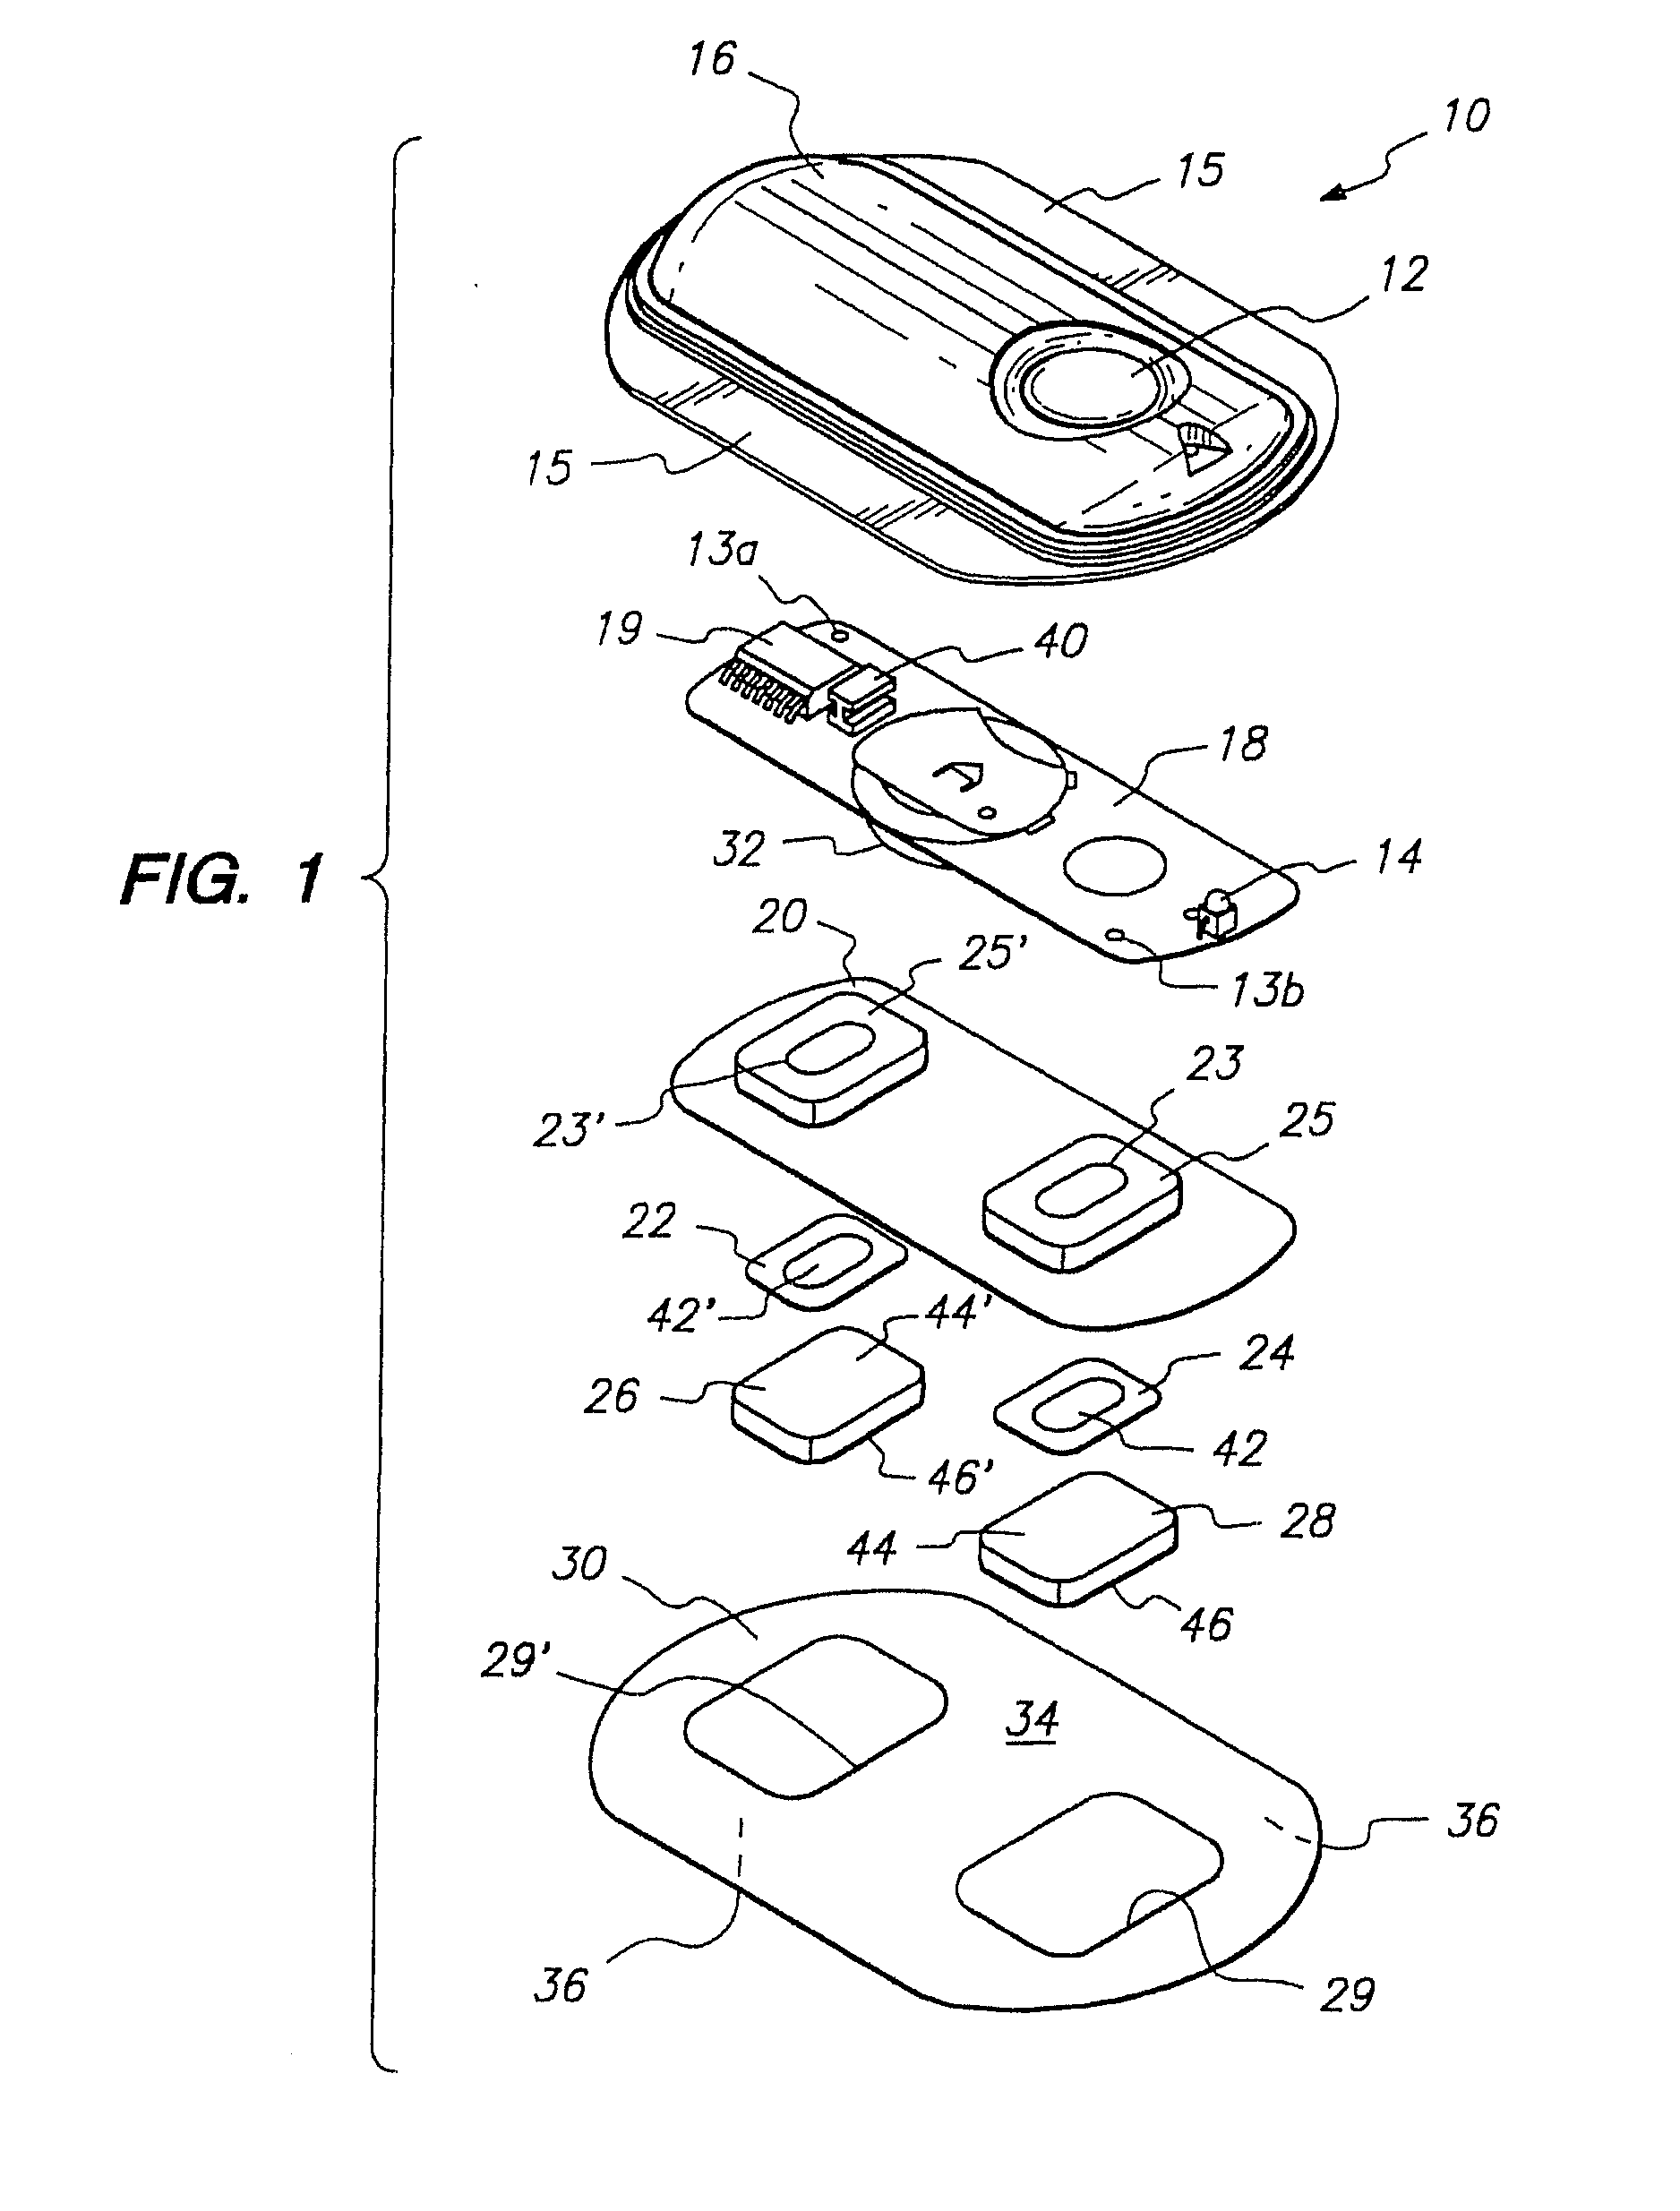 Device for transdermal electrotransport delivery of fentanyl and sufentanil